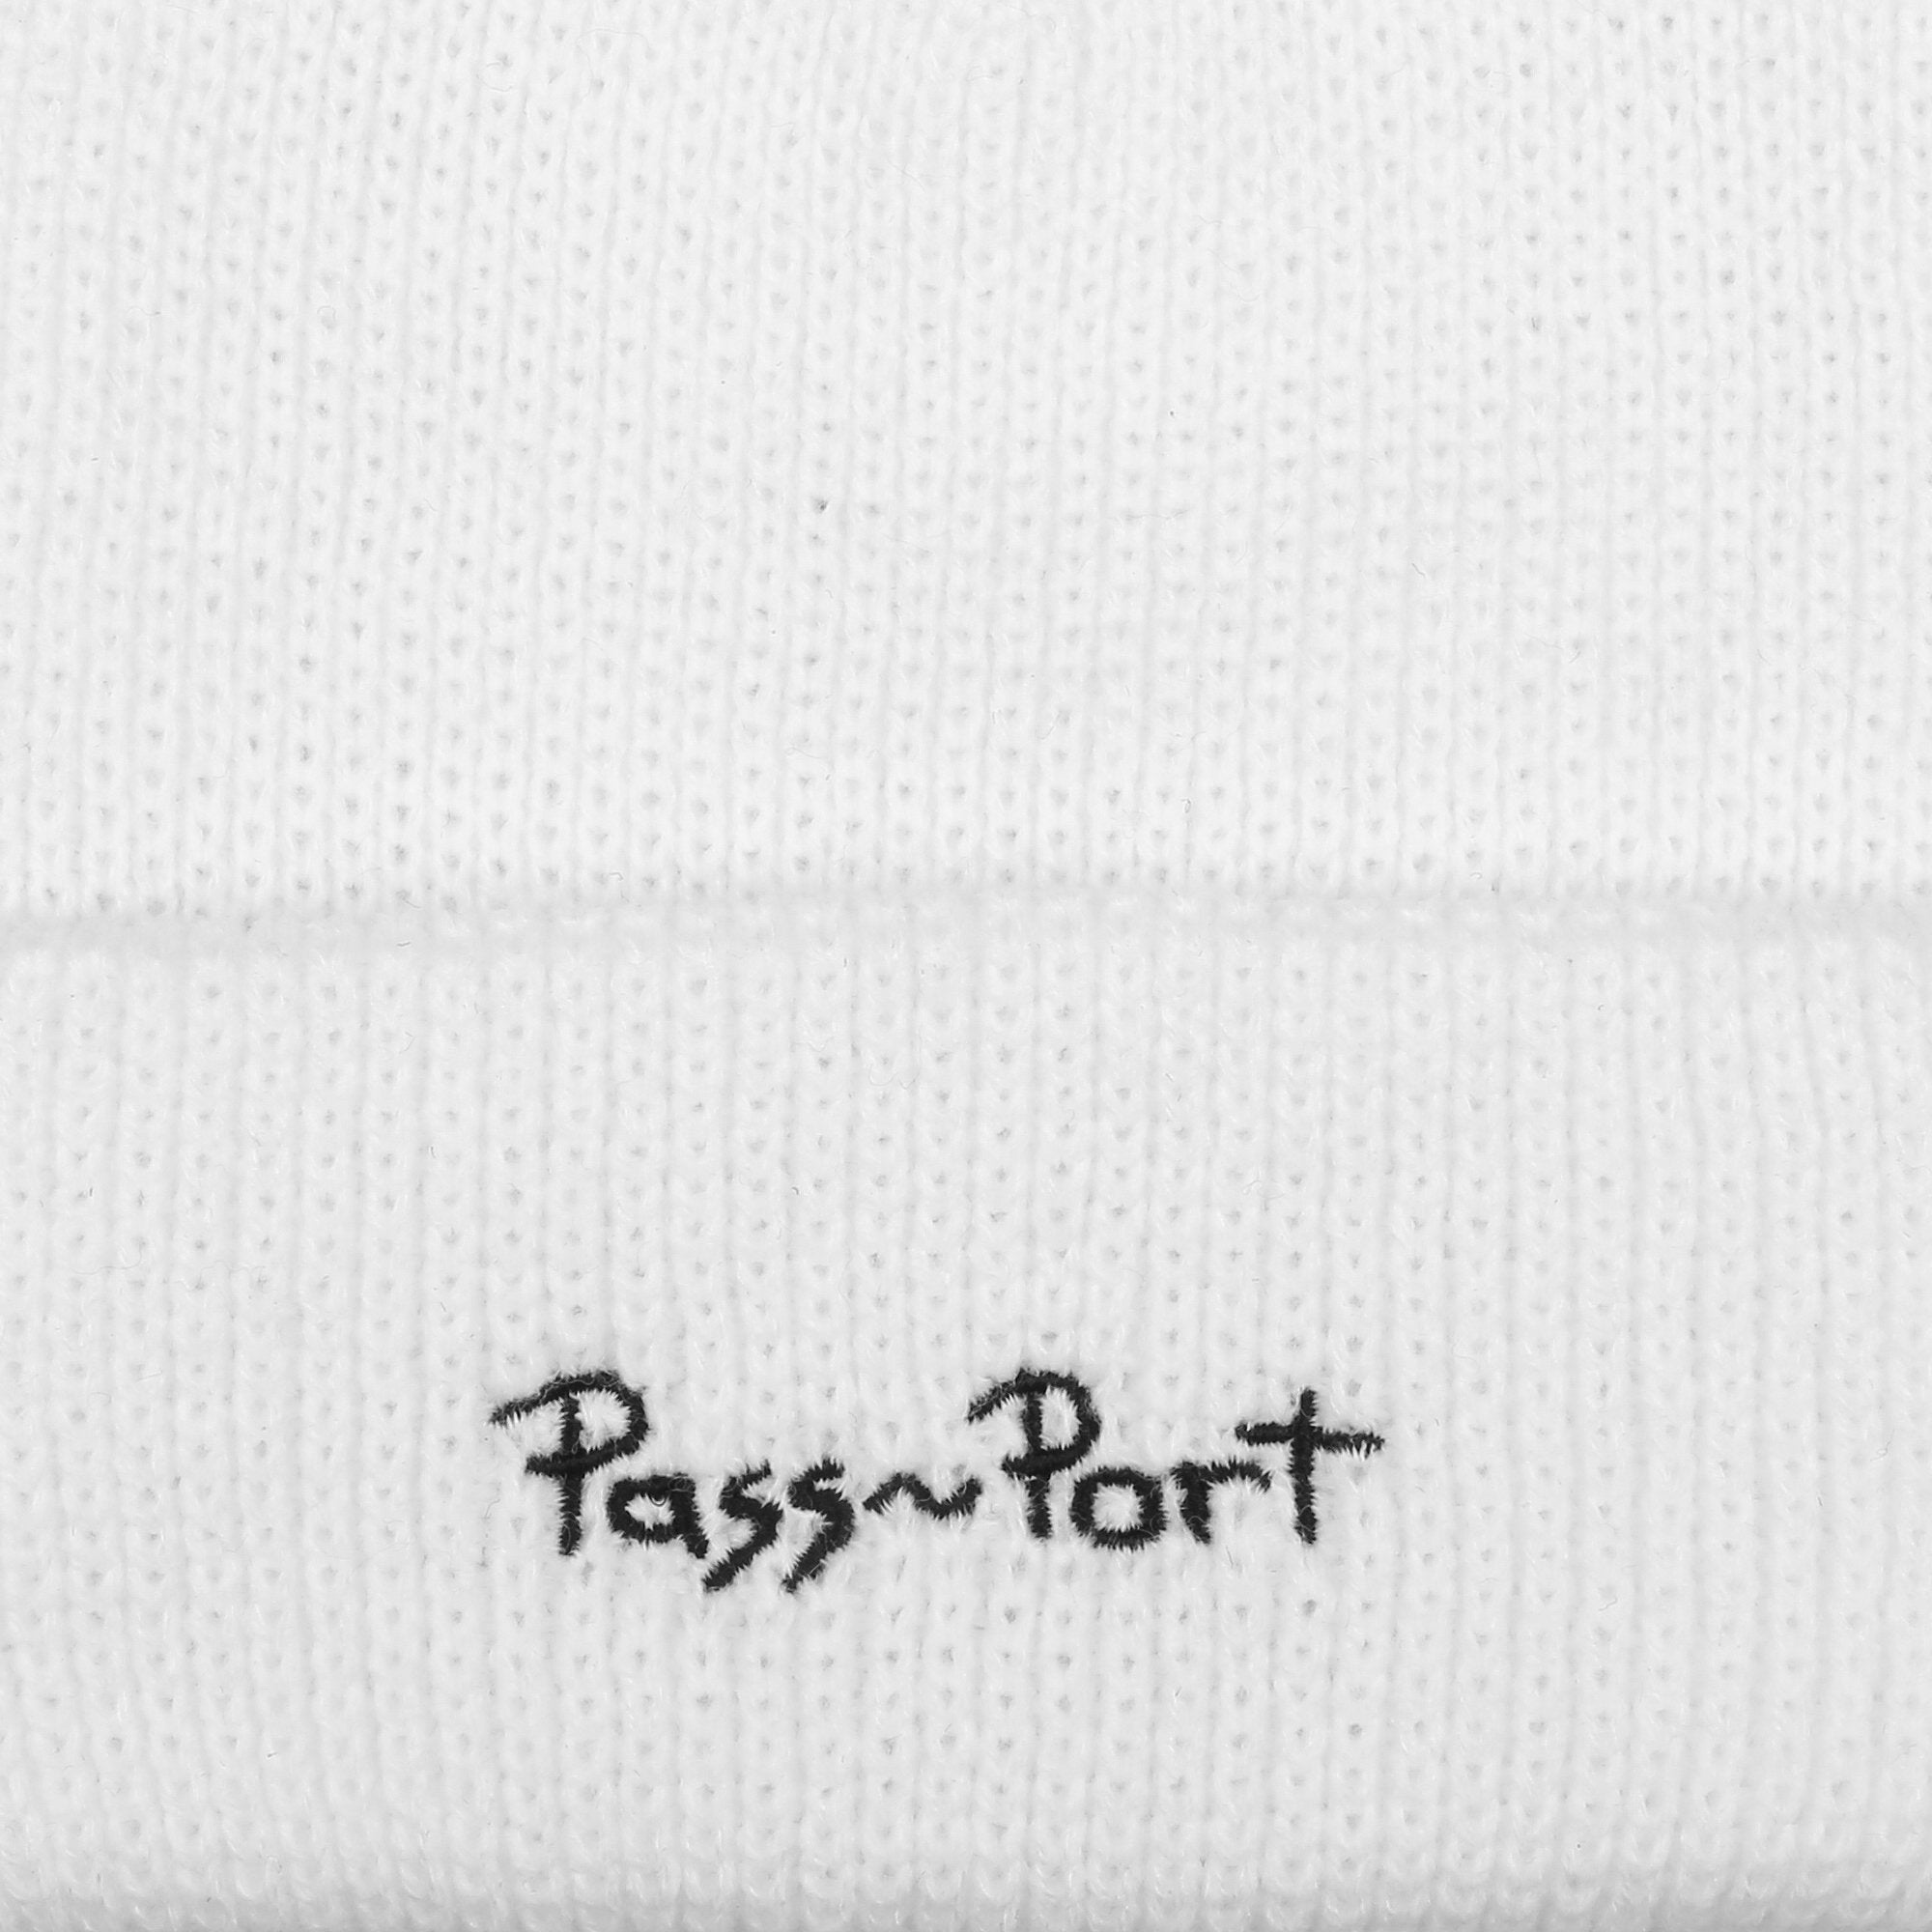 PASS~PORT TOBY ZOATES "COPPERS" BEANIE WHITE